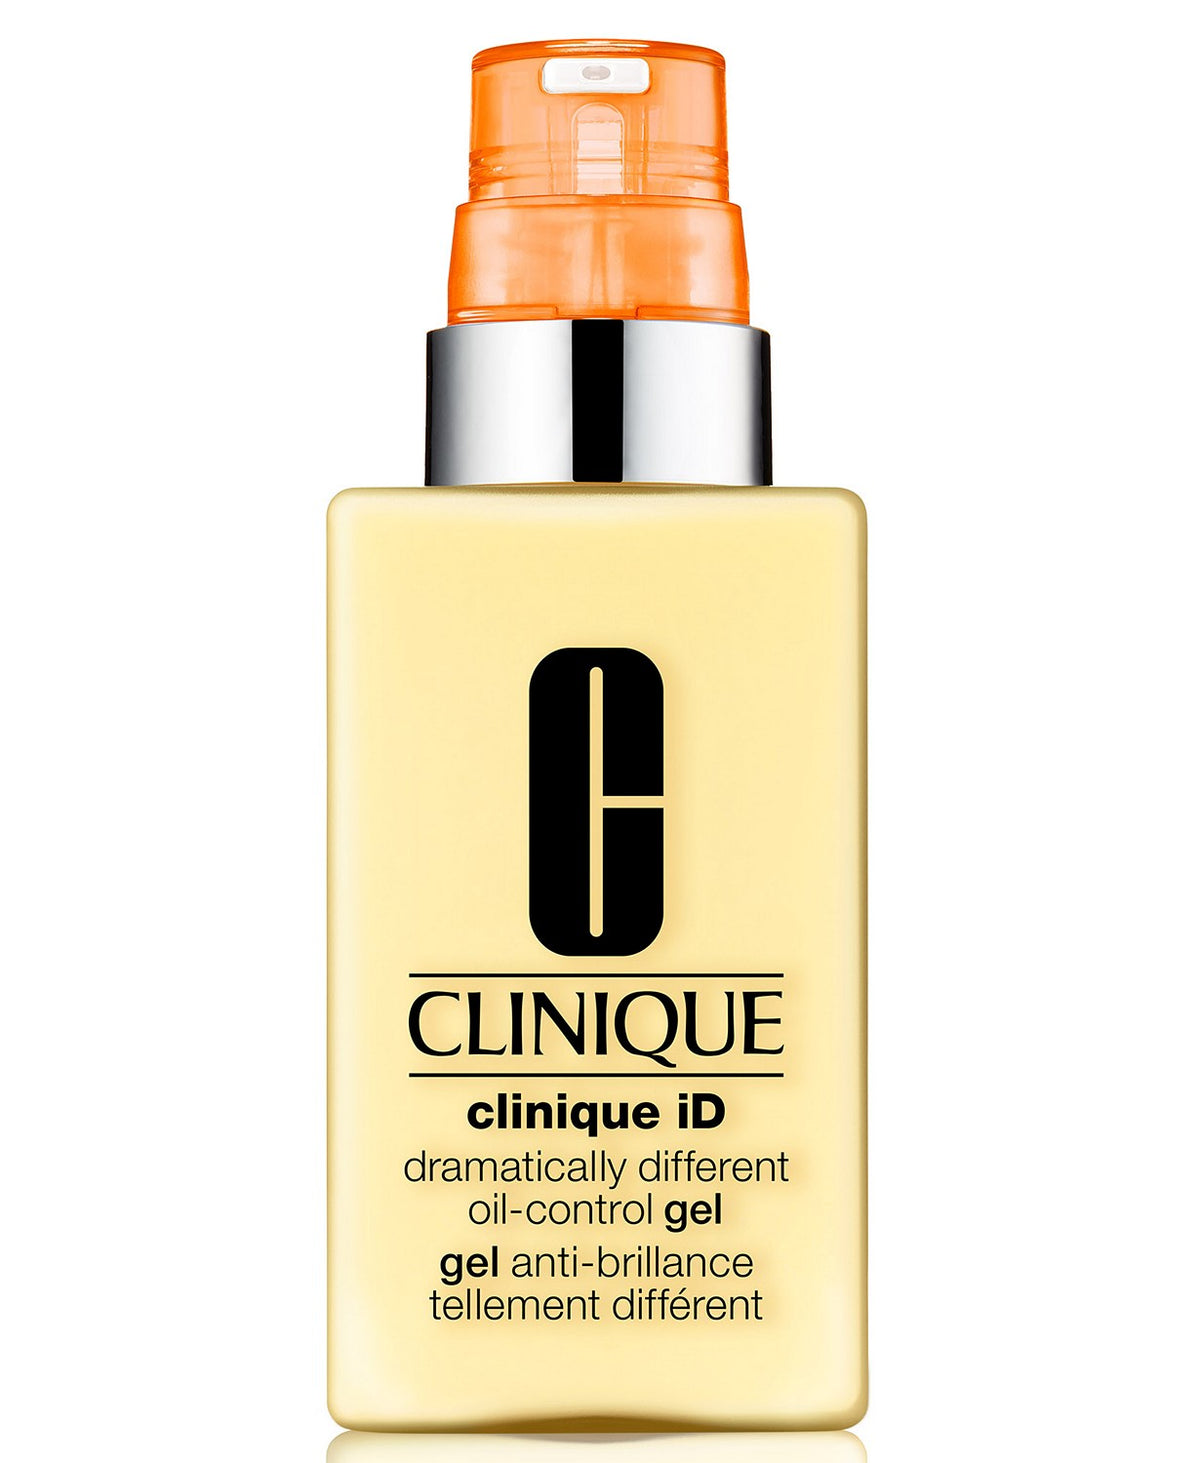 Clinique iD Dramatically Different Oil-Control Gel With Active Cartridge Concentrate™ For Fatigue, 4.2 oz